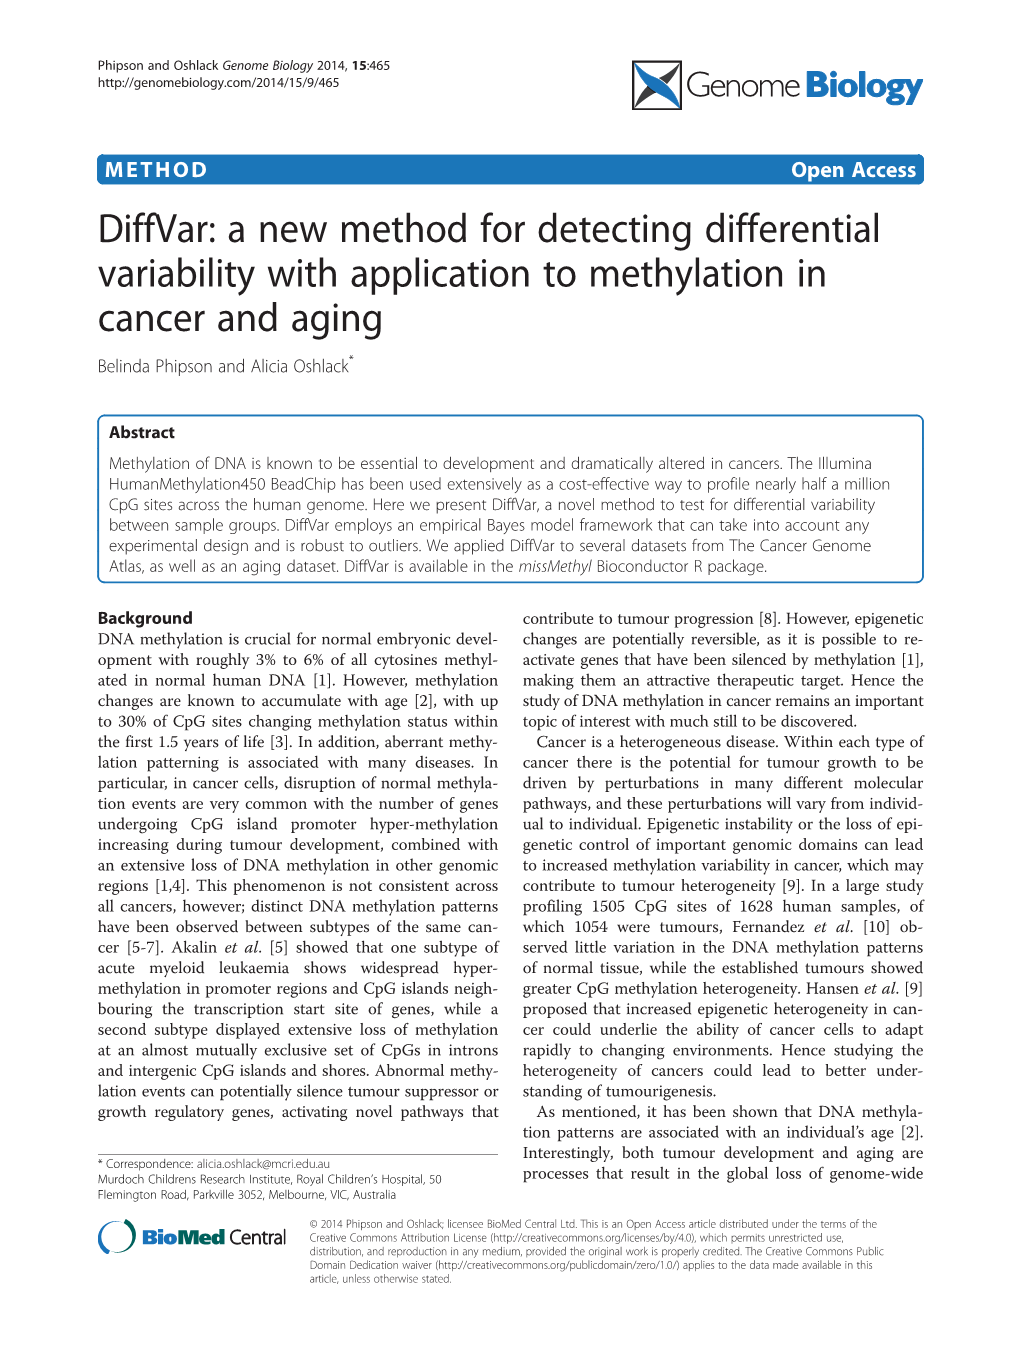 Diffvar: a New Method for Detecting Differential Variability with Application to Methylation in Cancer and Aging Belinda Phipson and Alicia Oshlack*